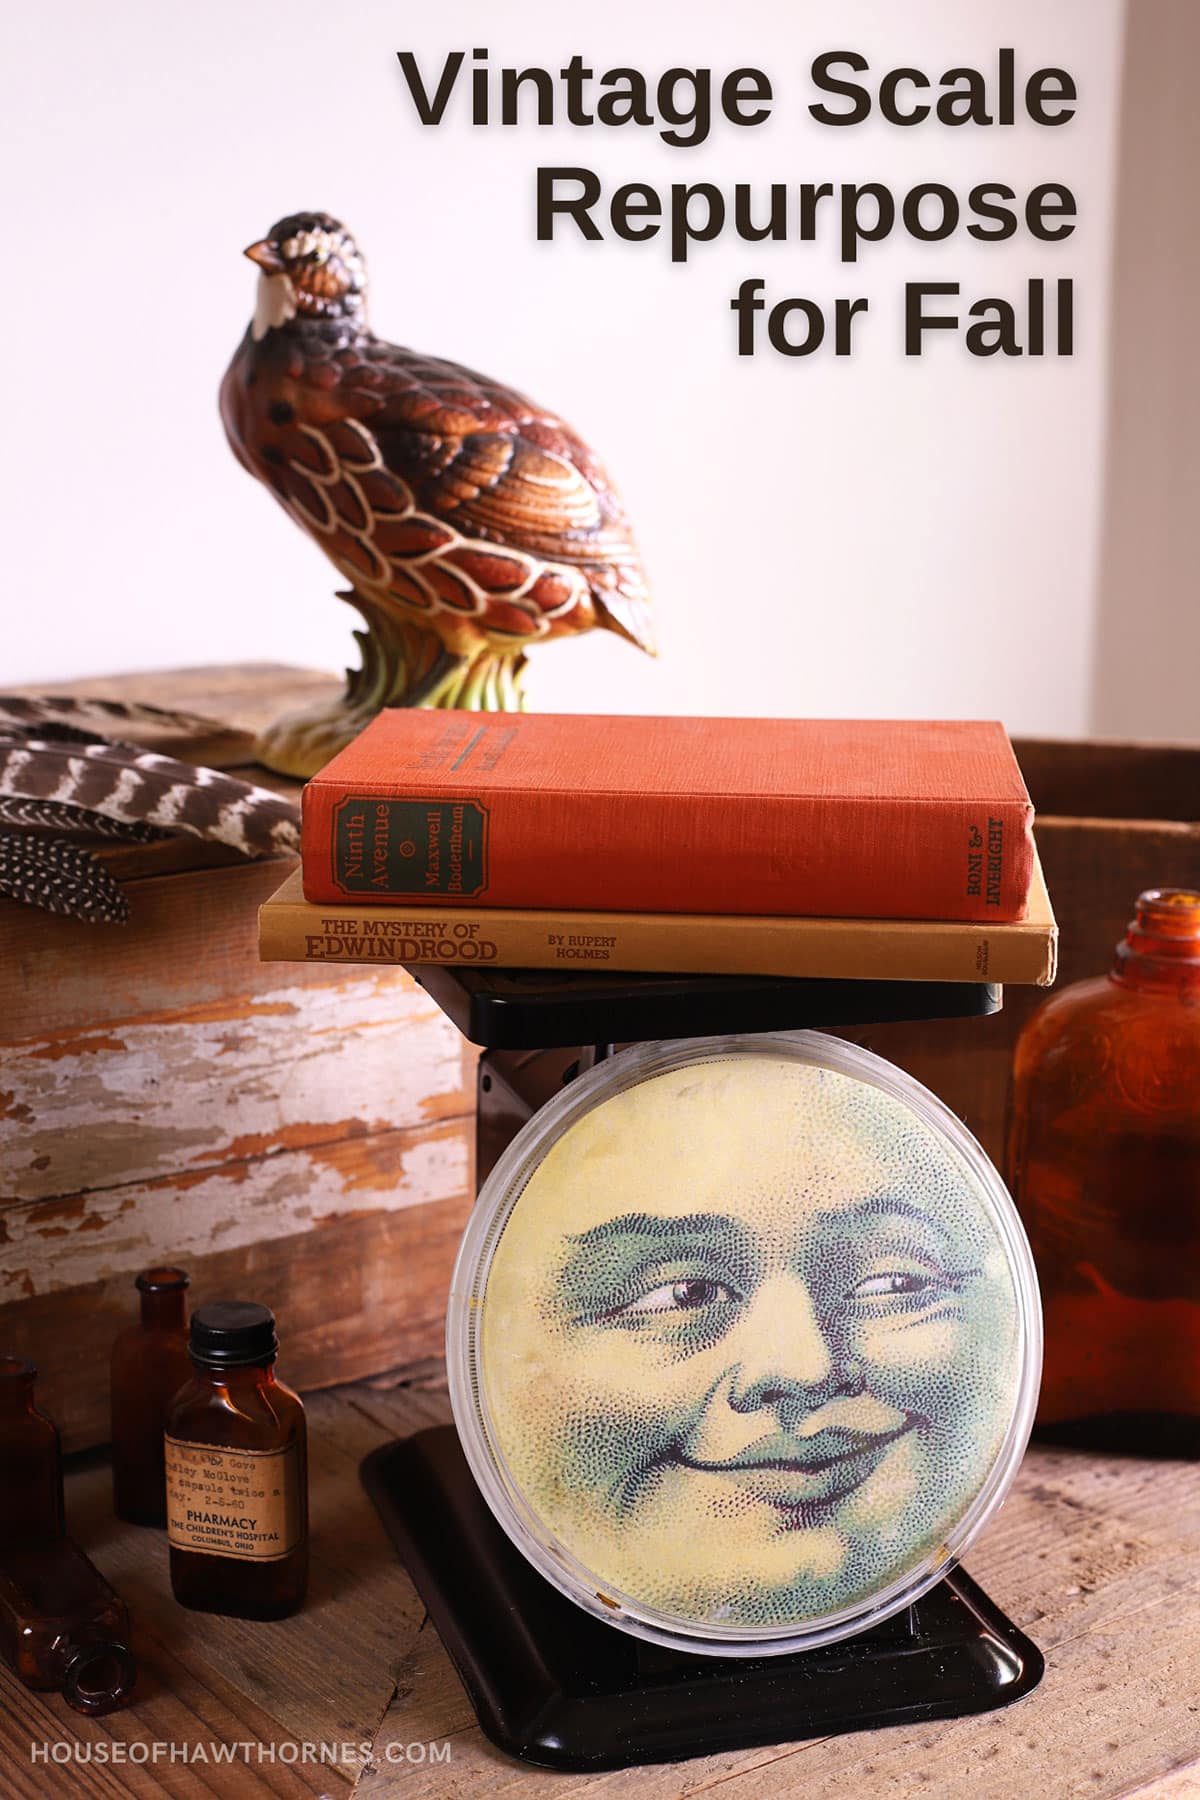 Vintage black scale with a man in the moon face on the dial. Cute decor for fall or Halloween. 